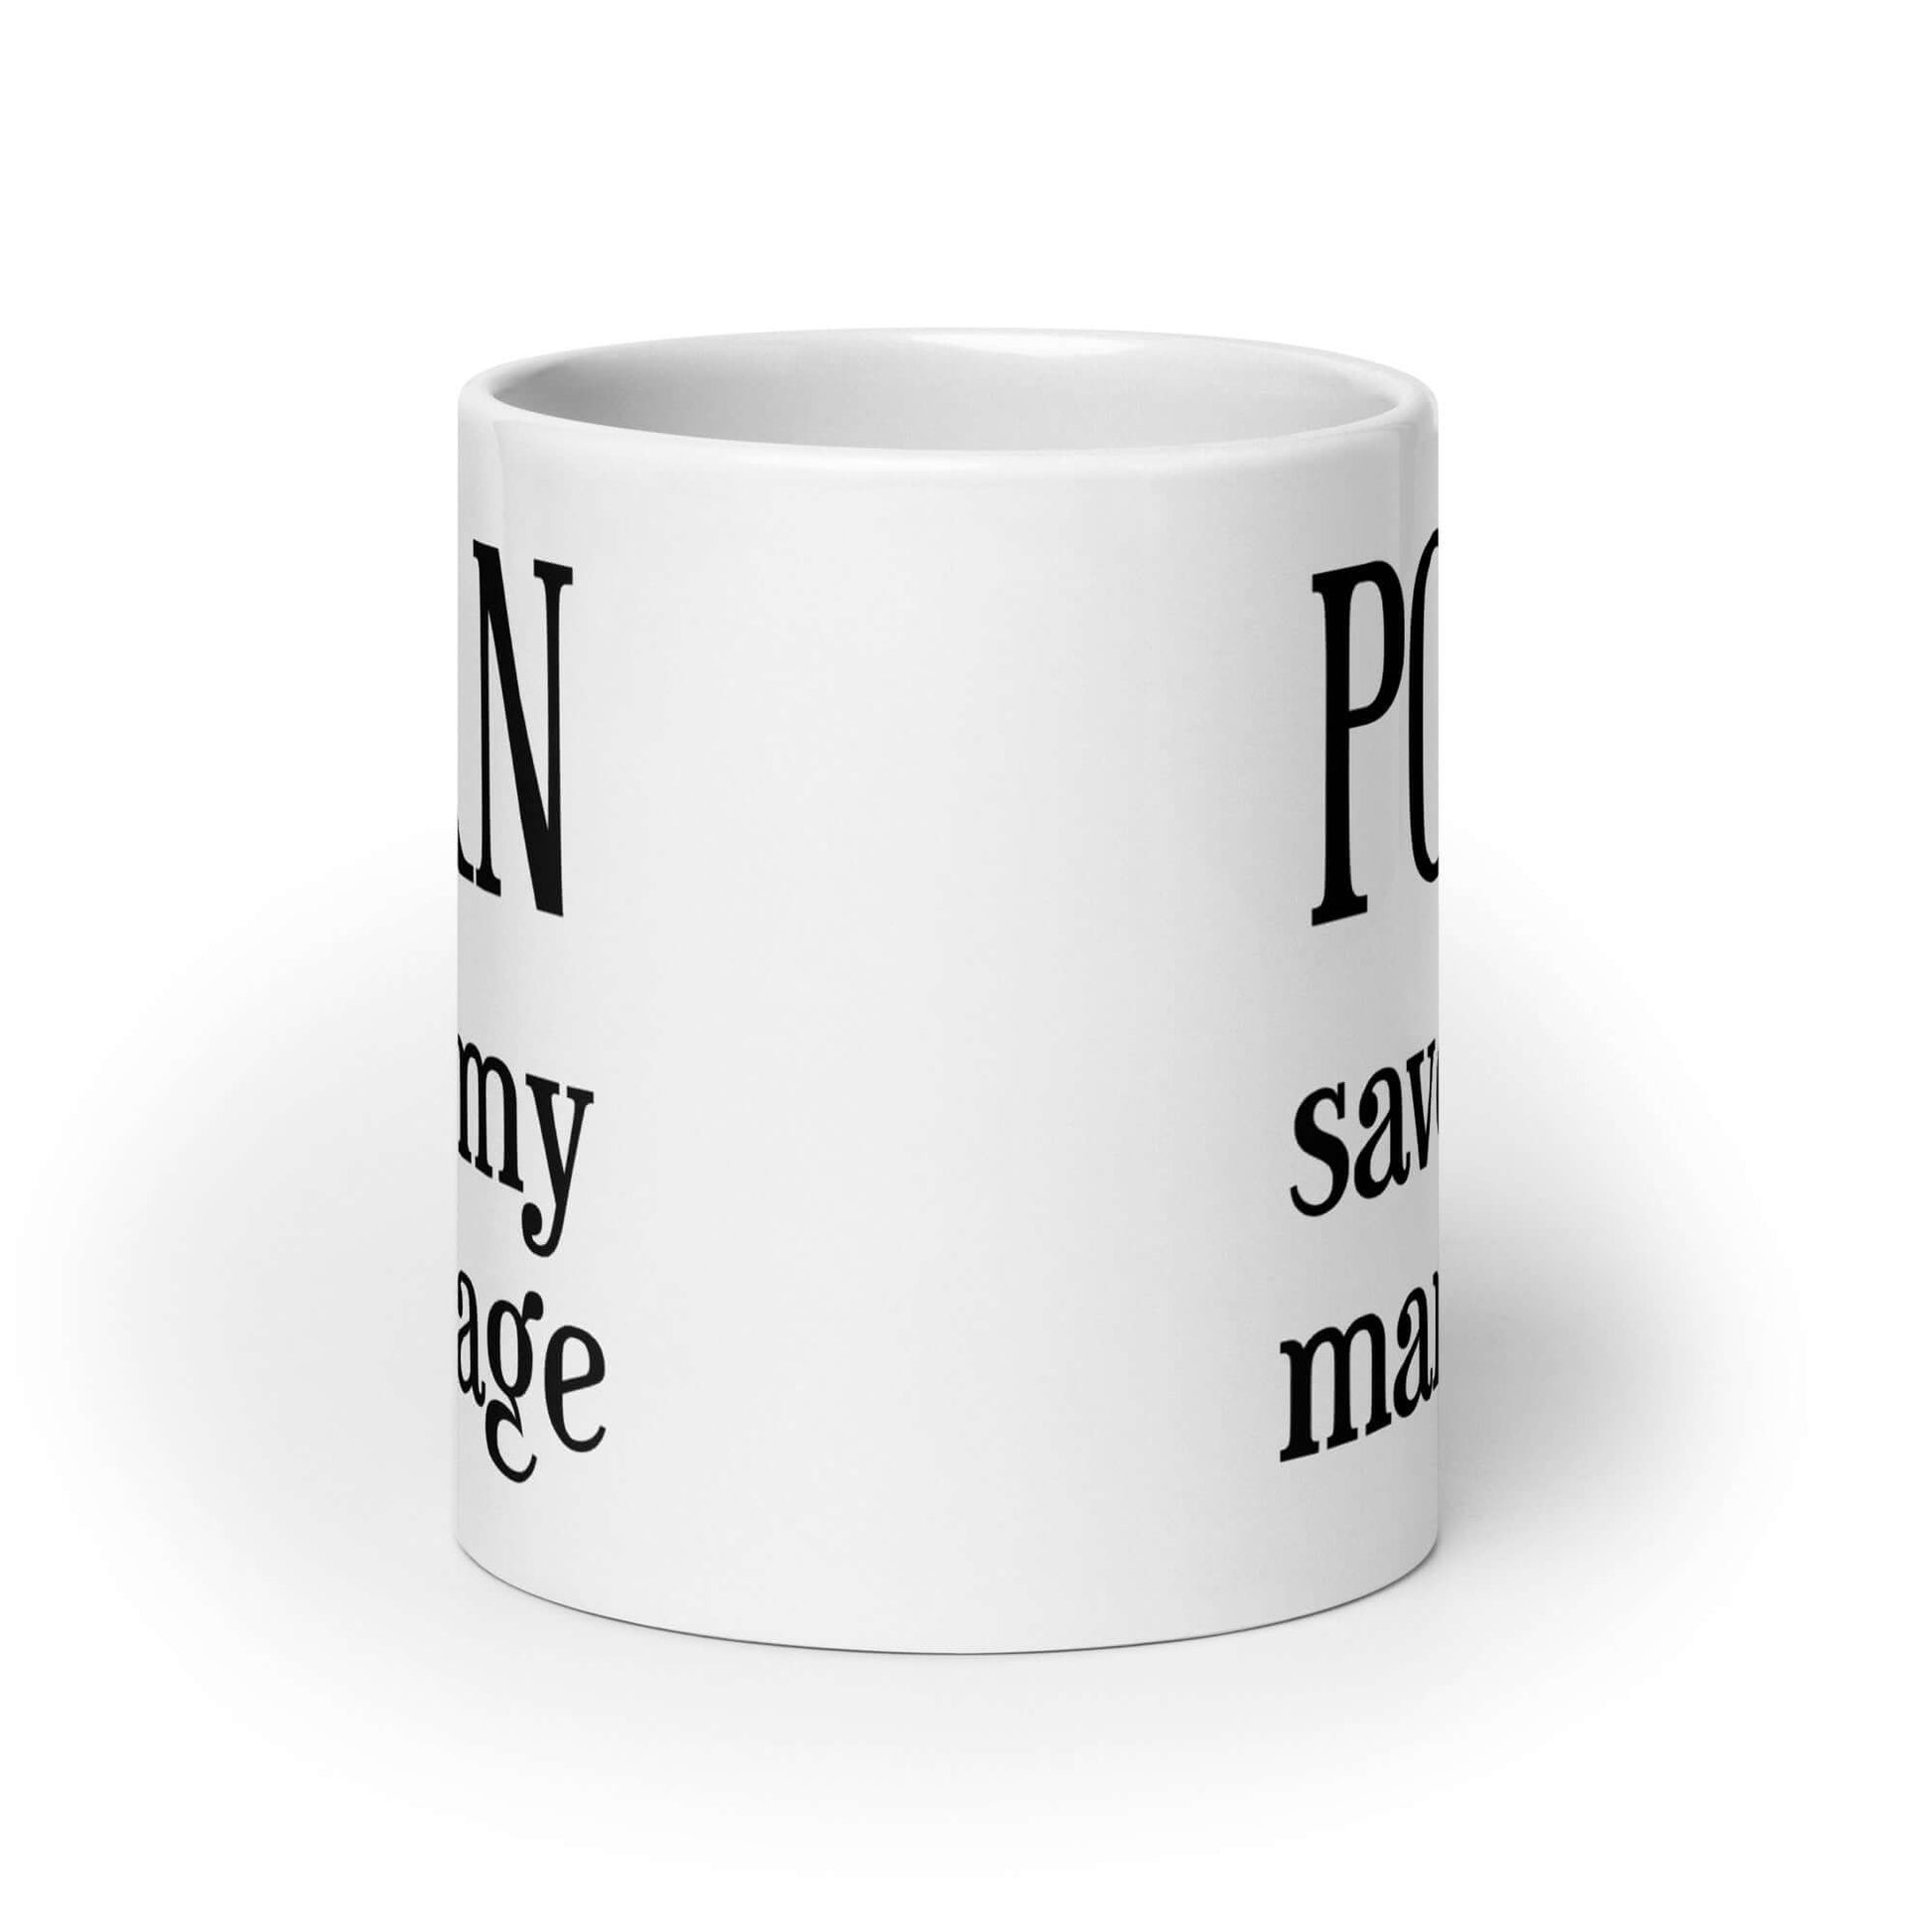 White ceramic mug with the phrase Porn saved my marriage printed on both sides of the mug.